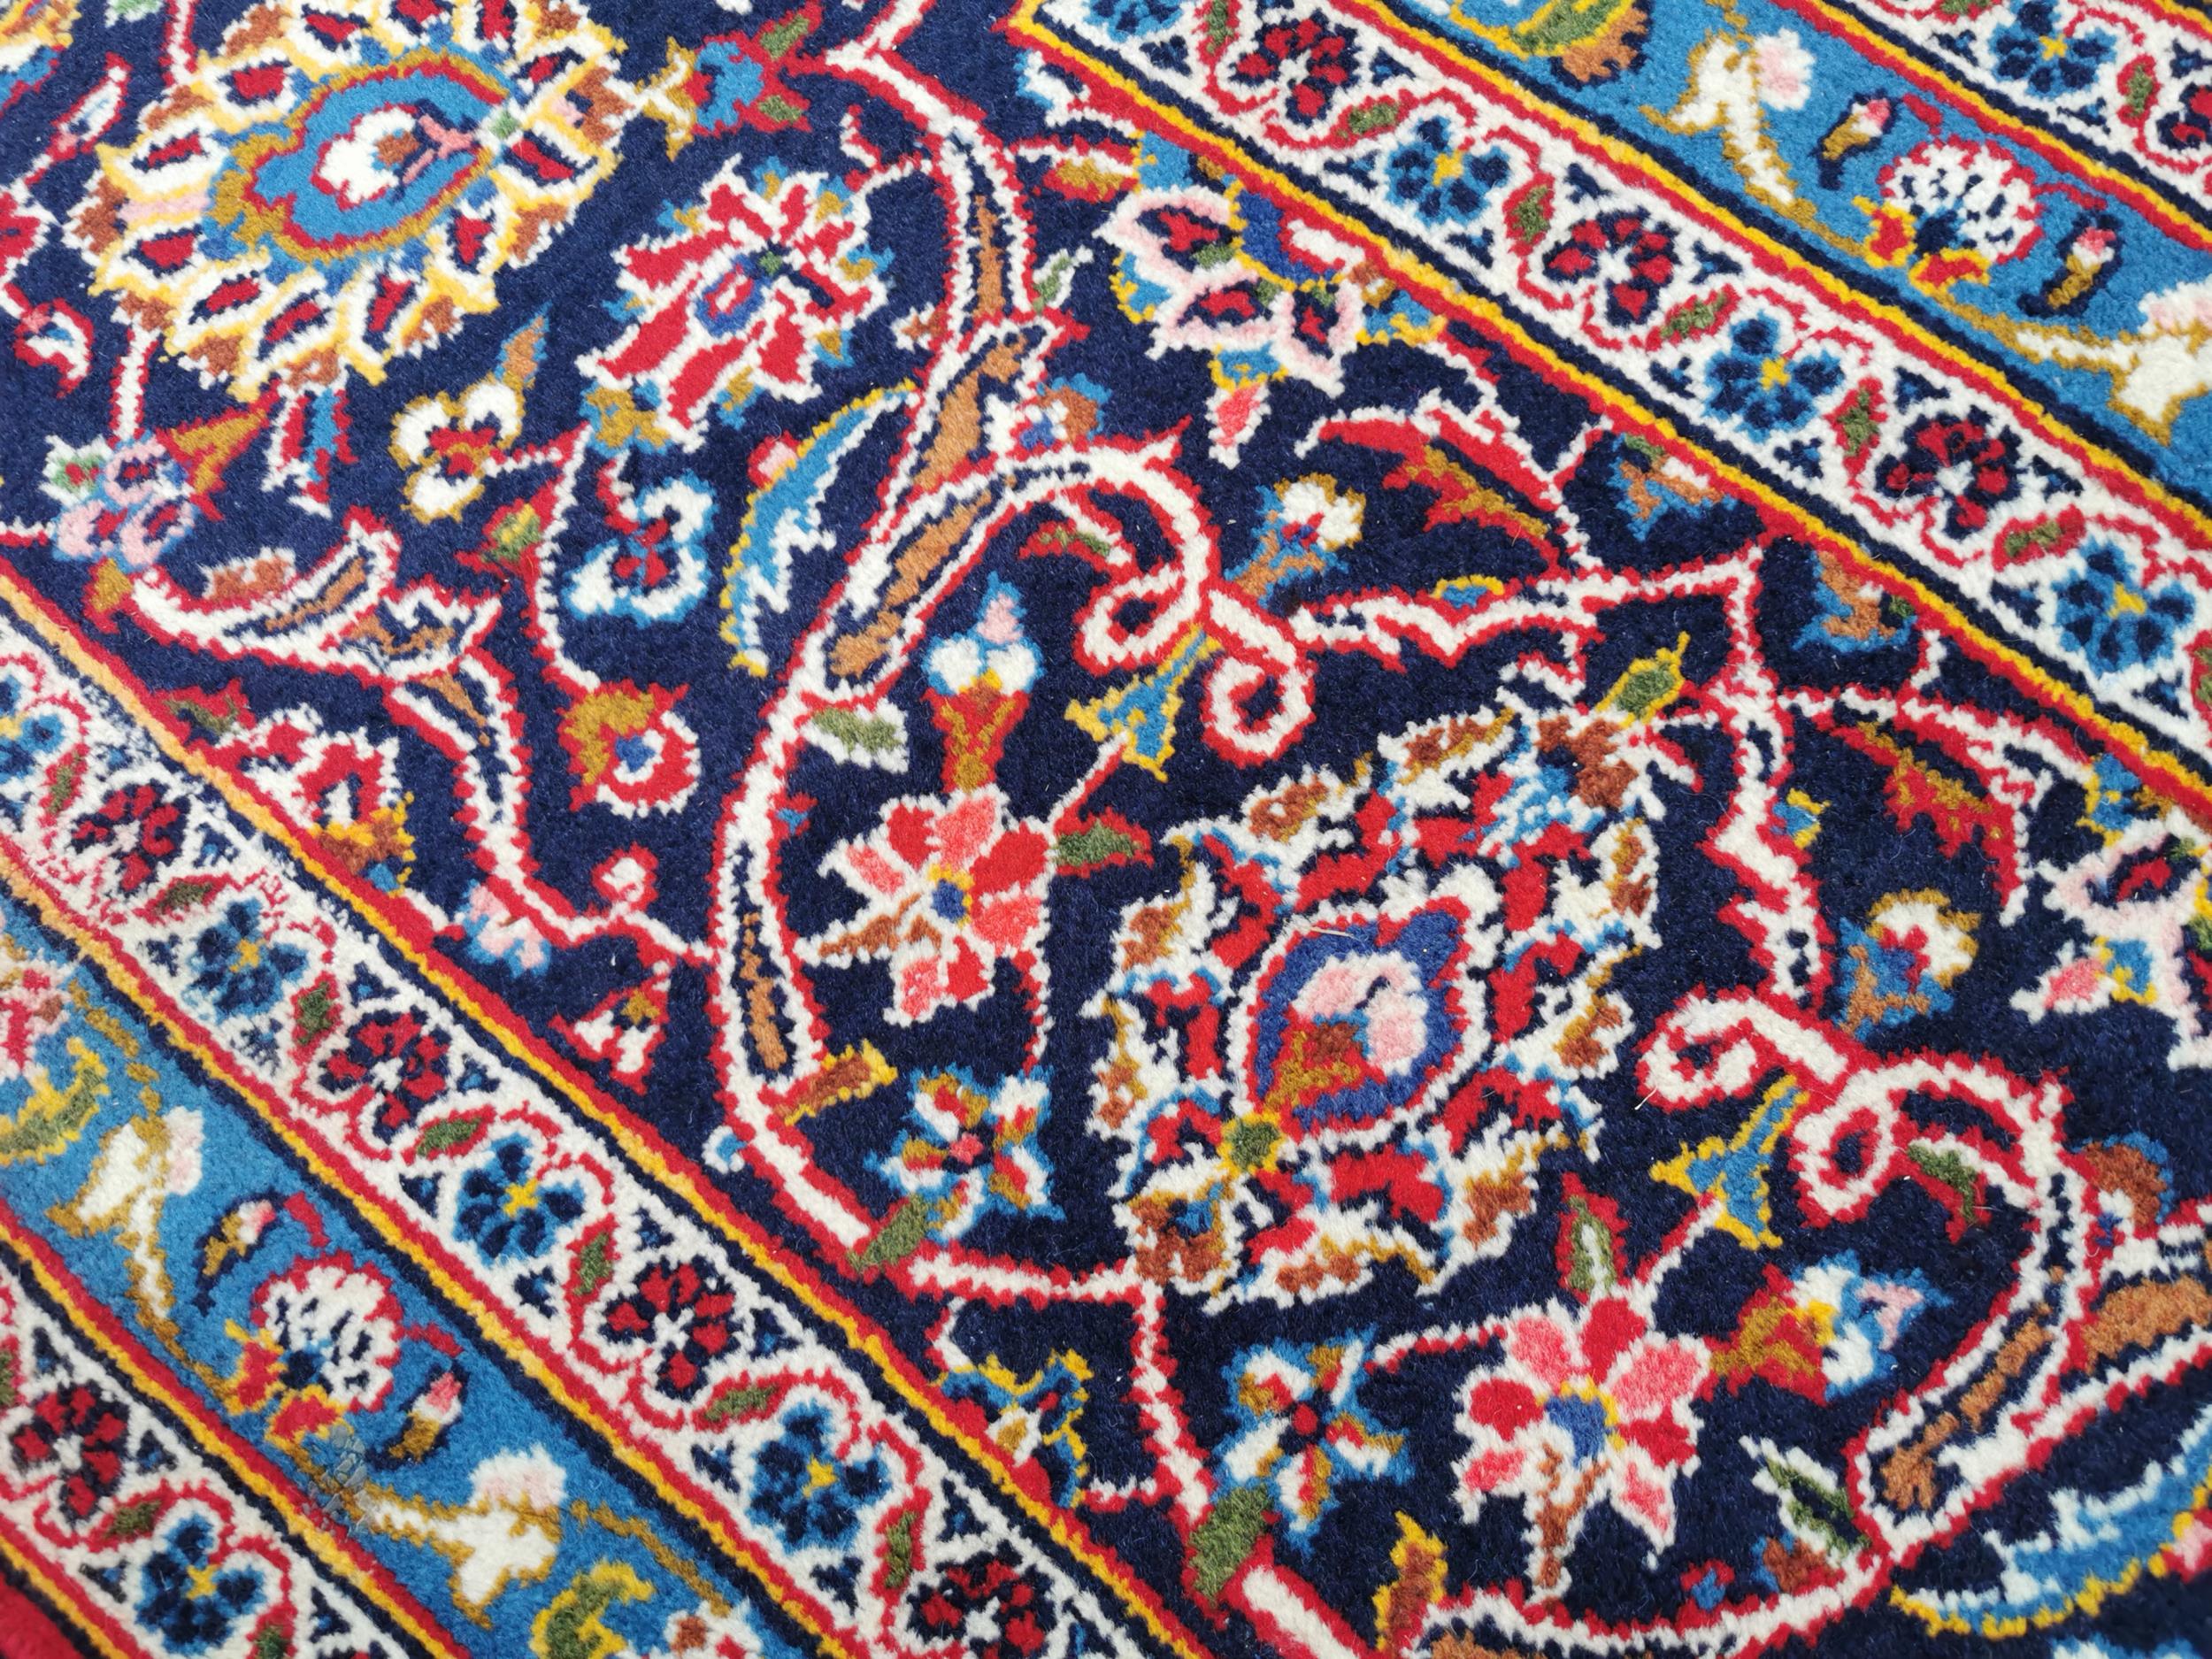 Good quality hand knotted Persian carpet square {342 cm L x 243 cm W}. - Image 7 of 7